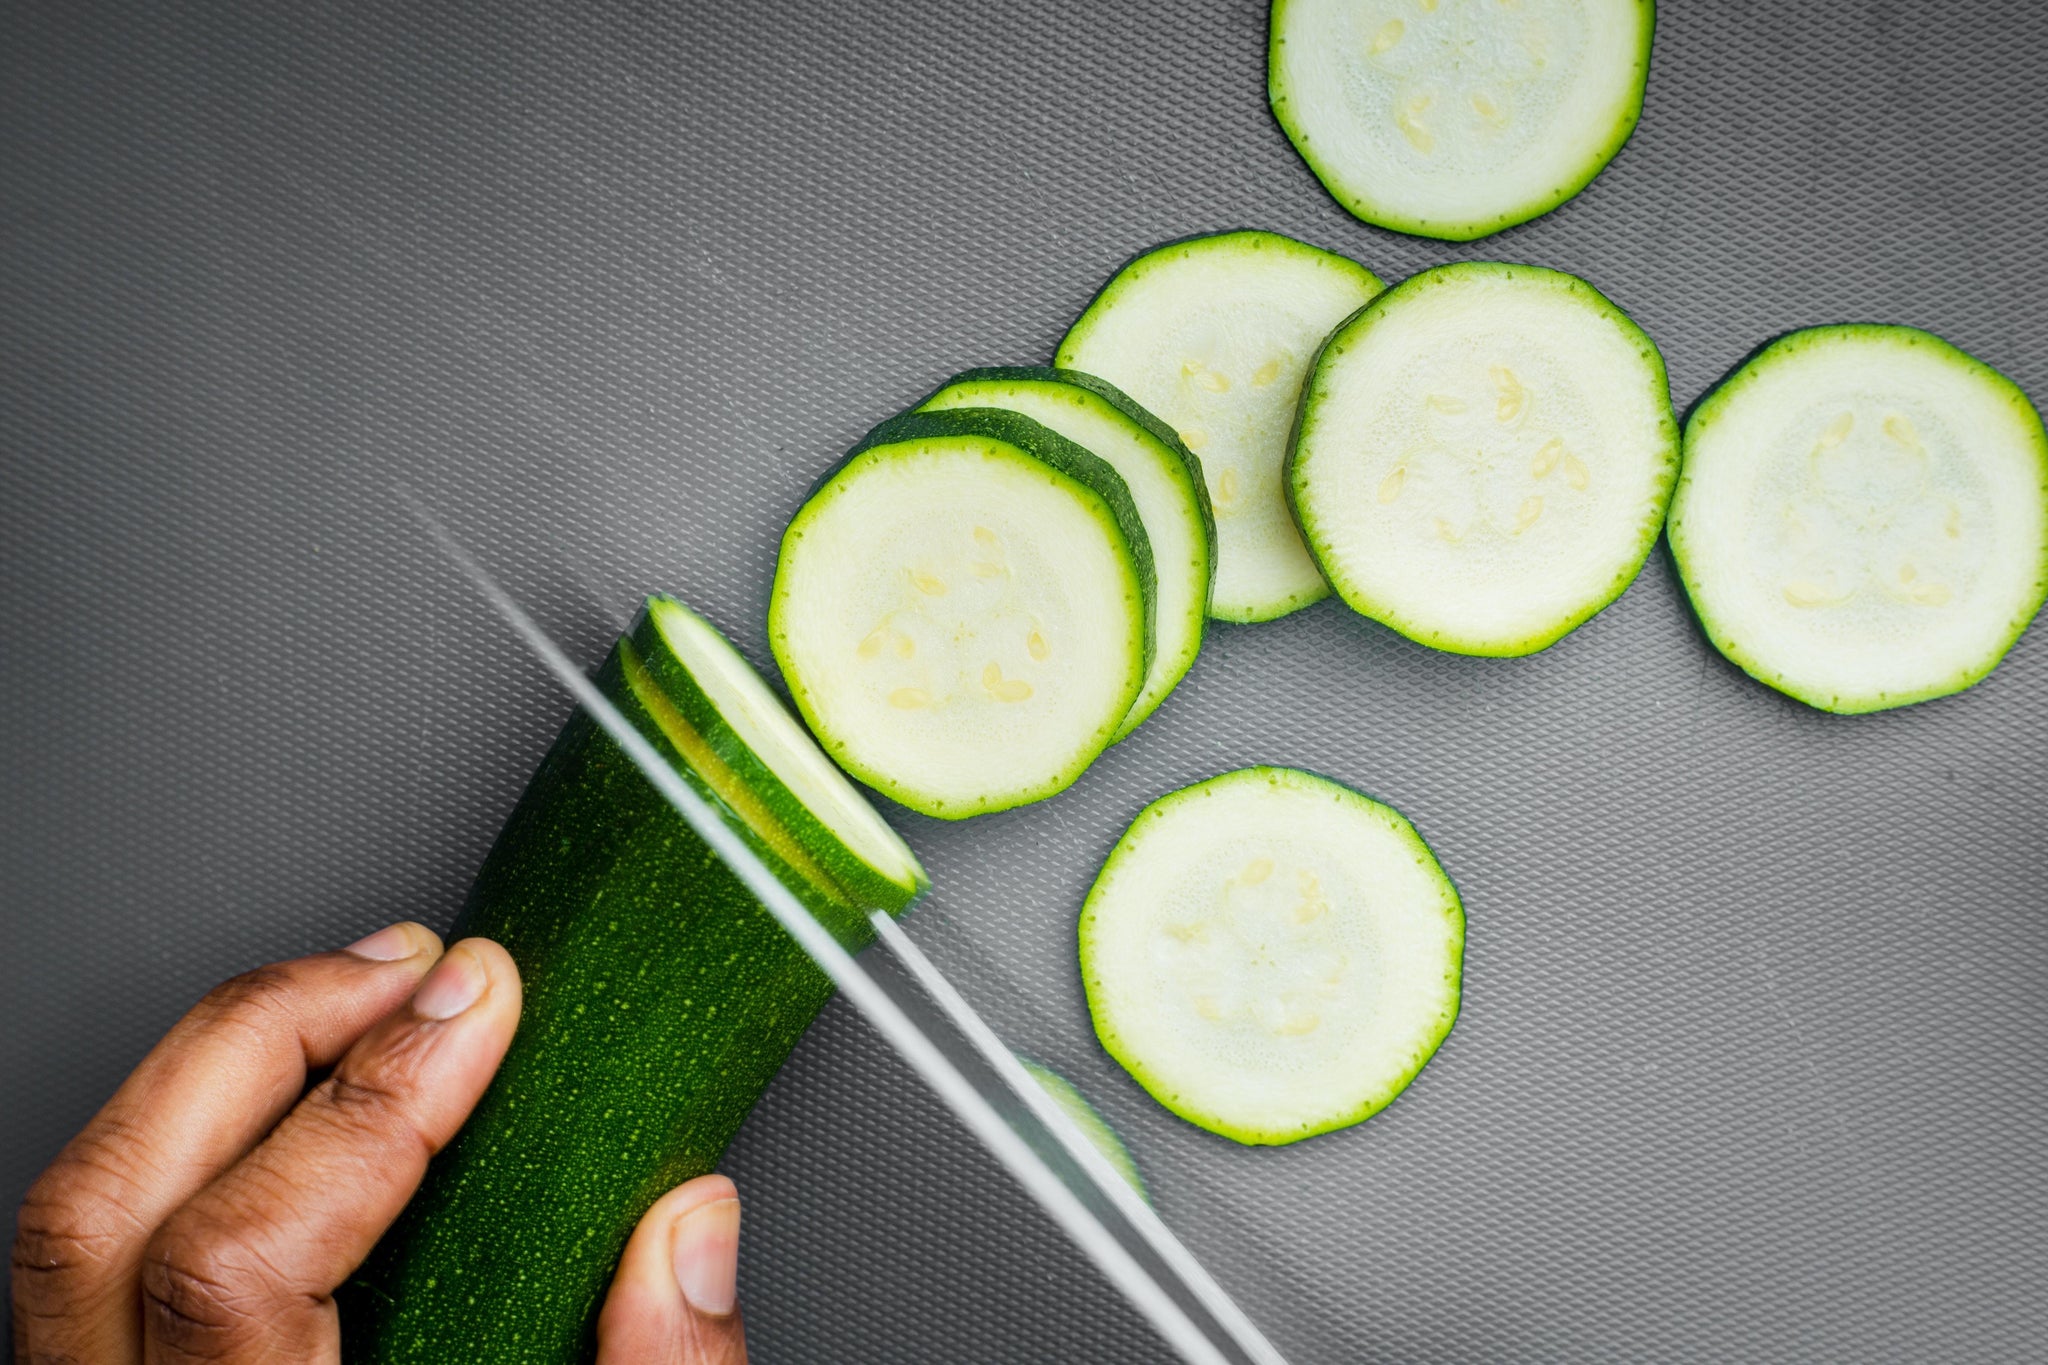 Zucchini is a versatile vegetable, learn how to buy, store, and cook